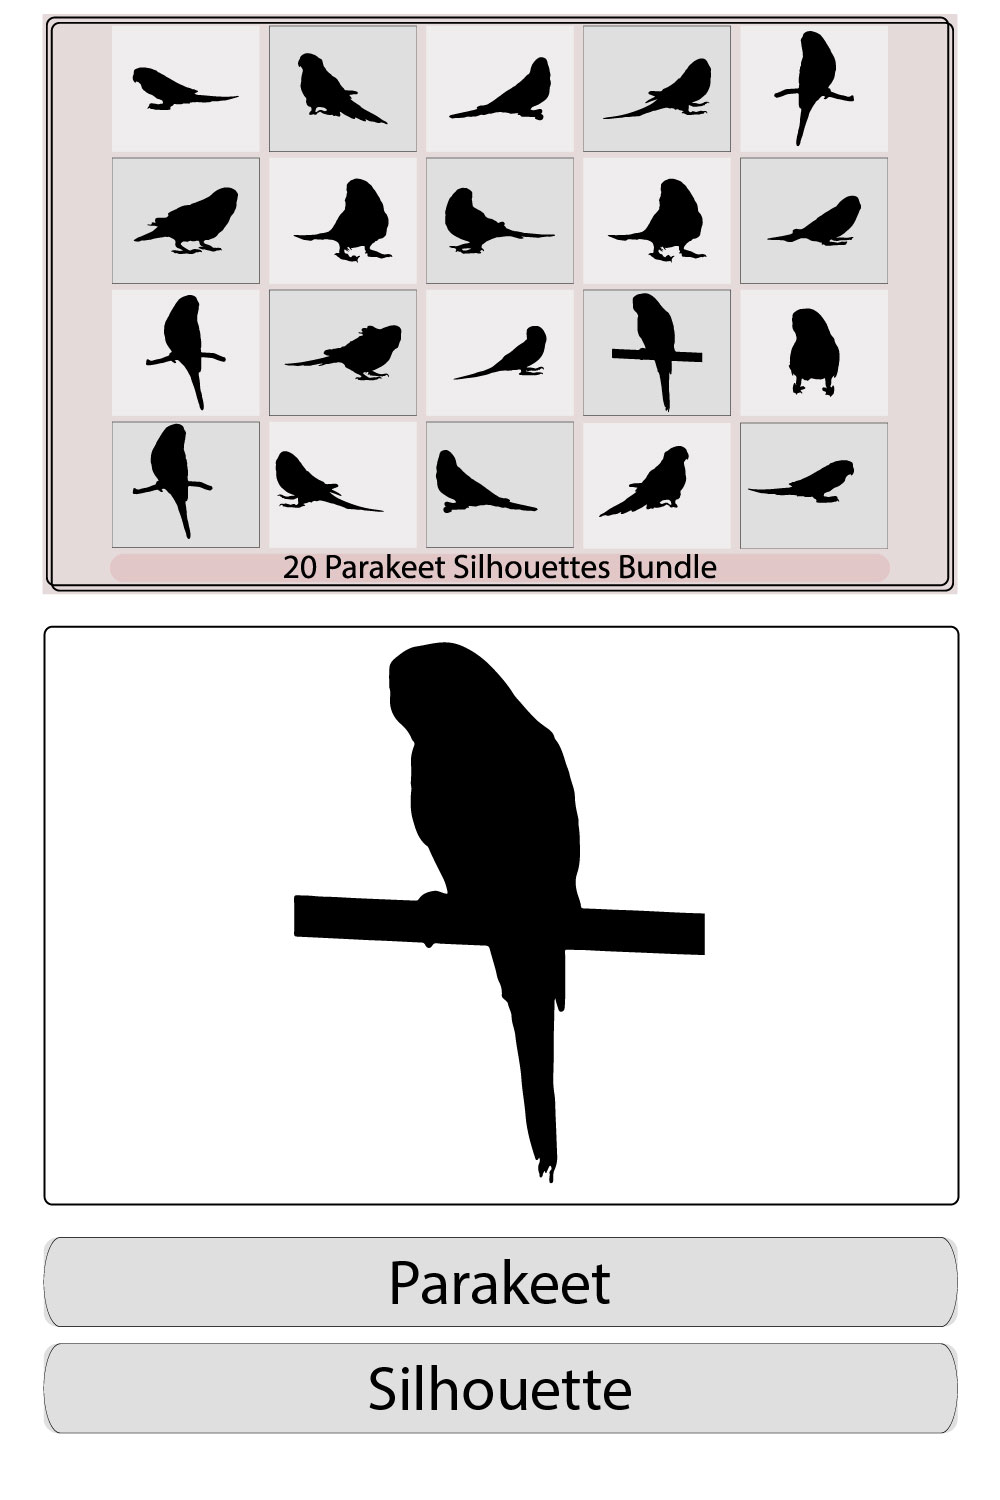 Vector of an parakeet Silhouette,Caturrita bird in profile view,Silhouette of a budgie,Vector parrot silhouettes of amazon jungle, pinterest preview image.